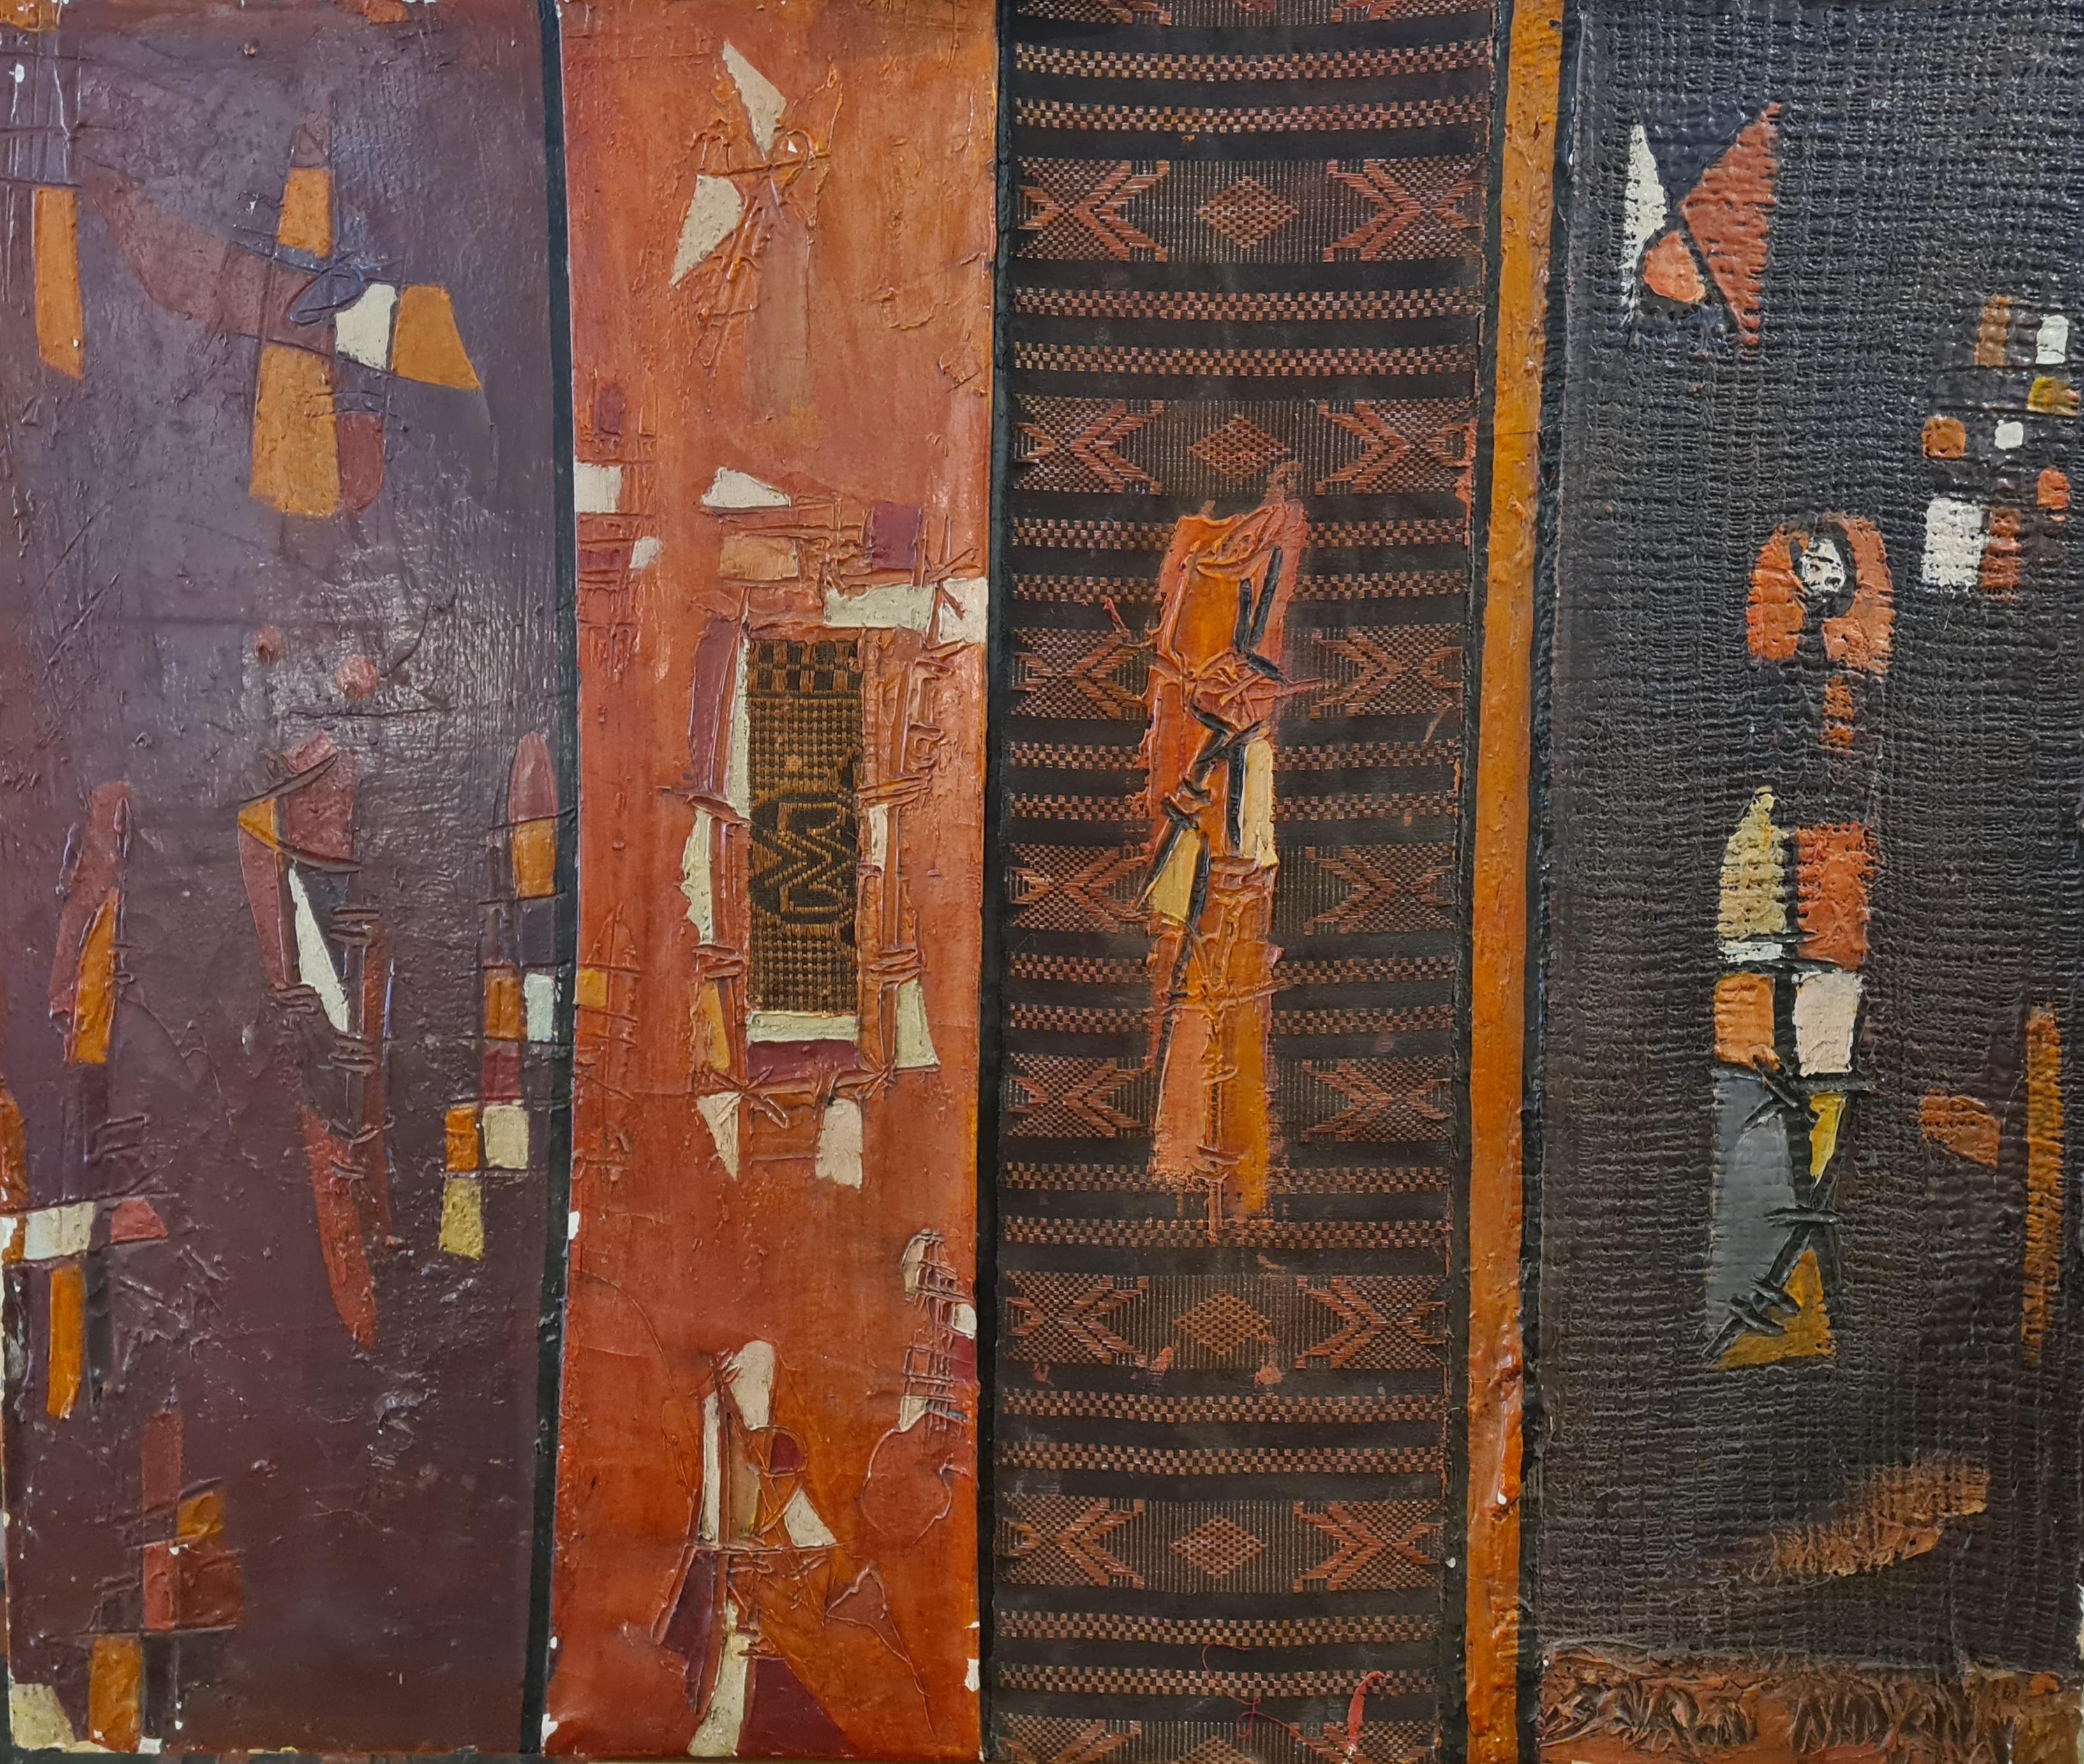 Four Panel Mixed Media Abstract Montage, African, Senegalese Outsider Art.